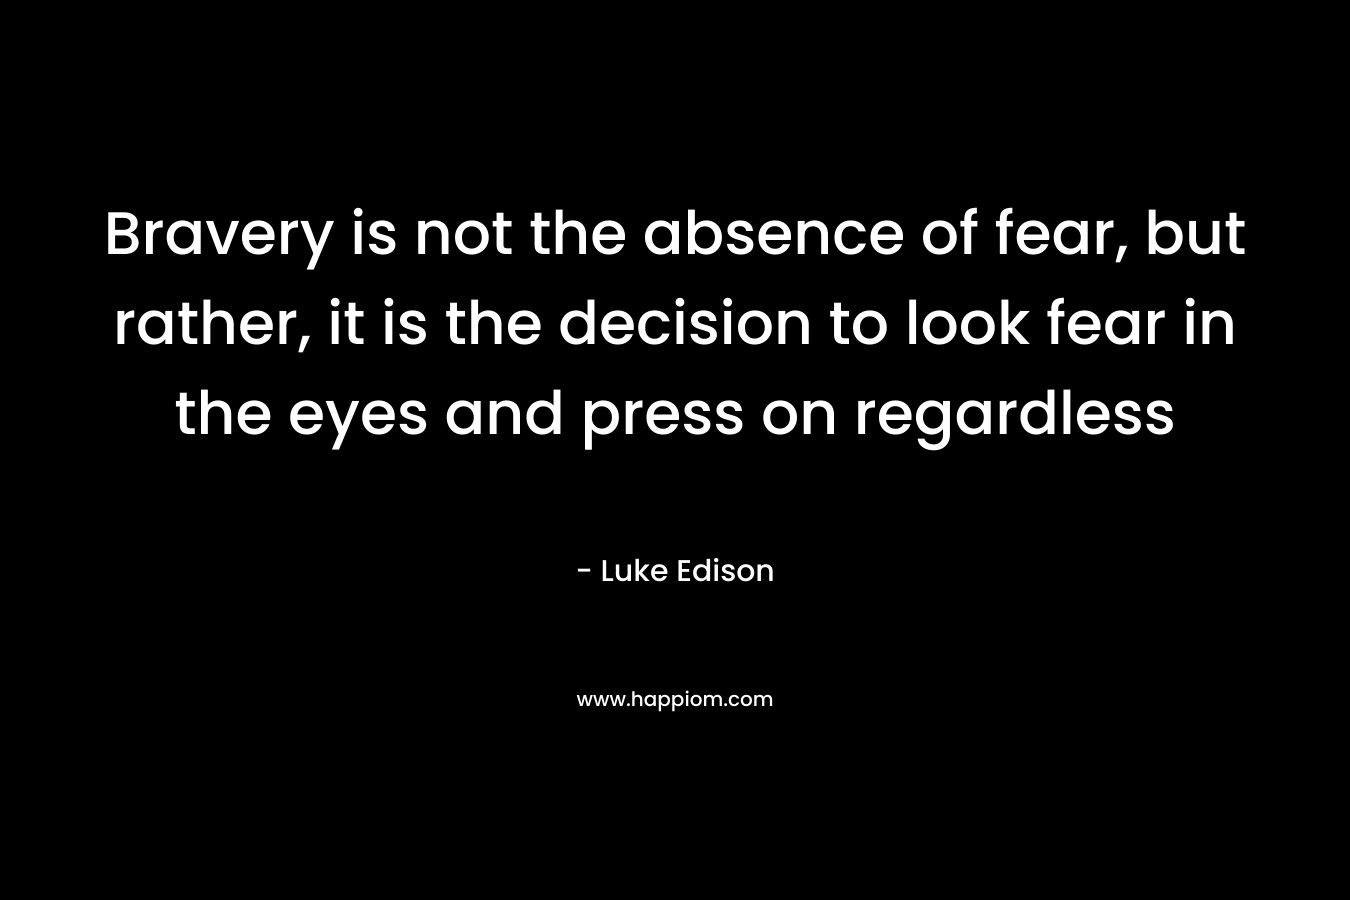 Bravery is not the absence of fear, but rather, it is the decision to look fear in the eyes and press on regardless – Luke Edison